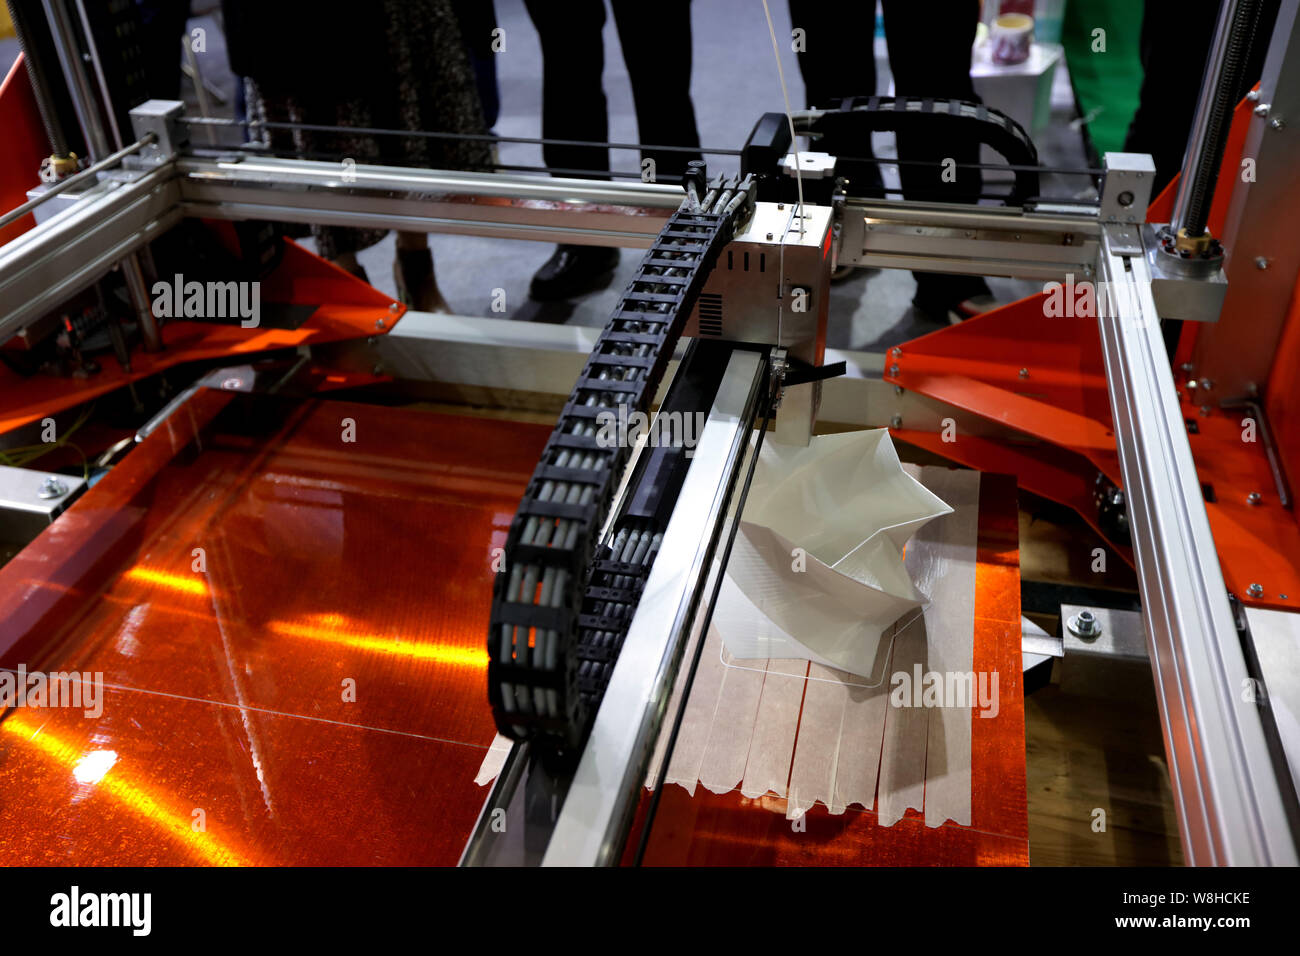 --FILE--A 3D printer is on display during an exhibition in Shanghai, China, 8 December 2015.   Shipment of 3D printers in the Chinese market is expect Stock Photo